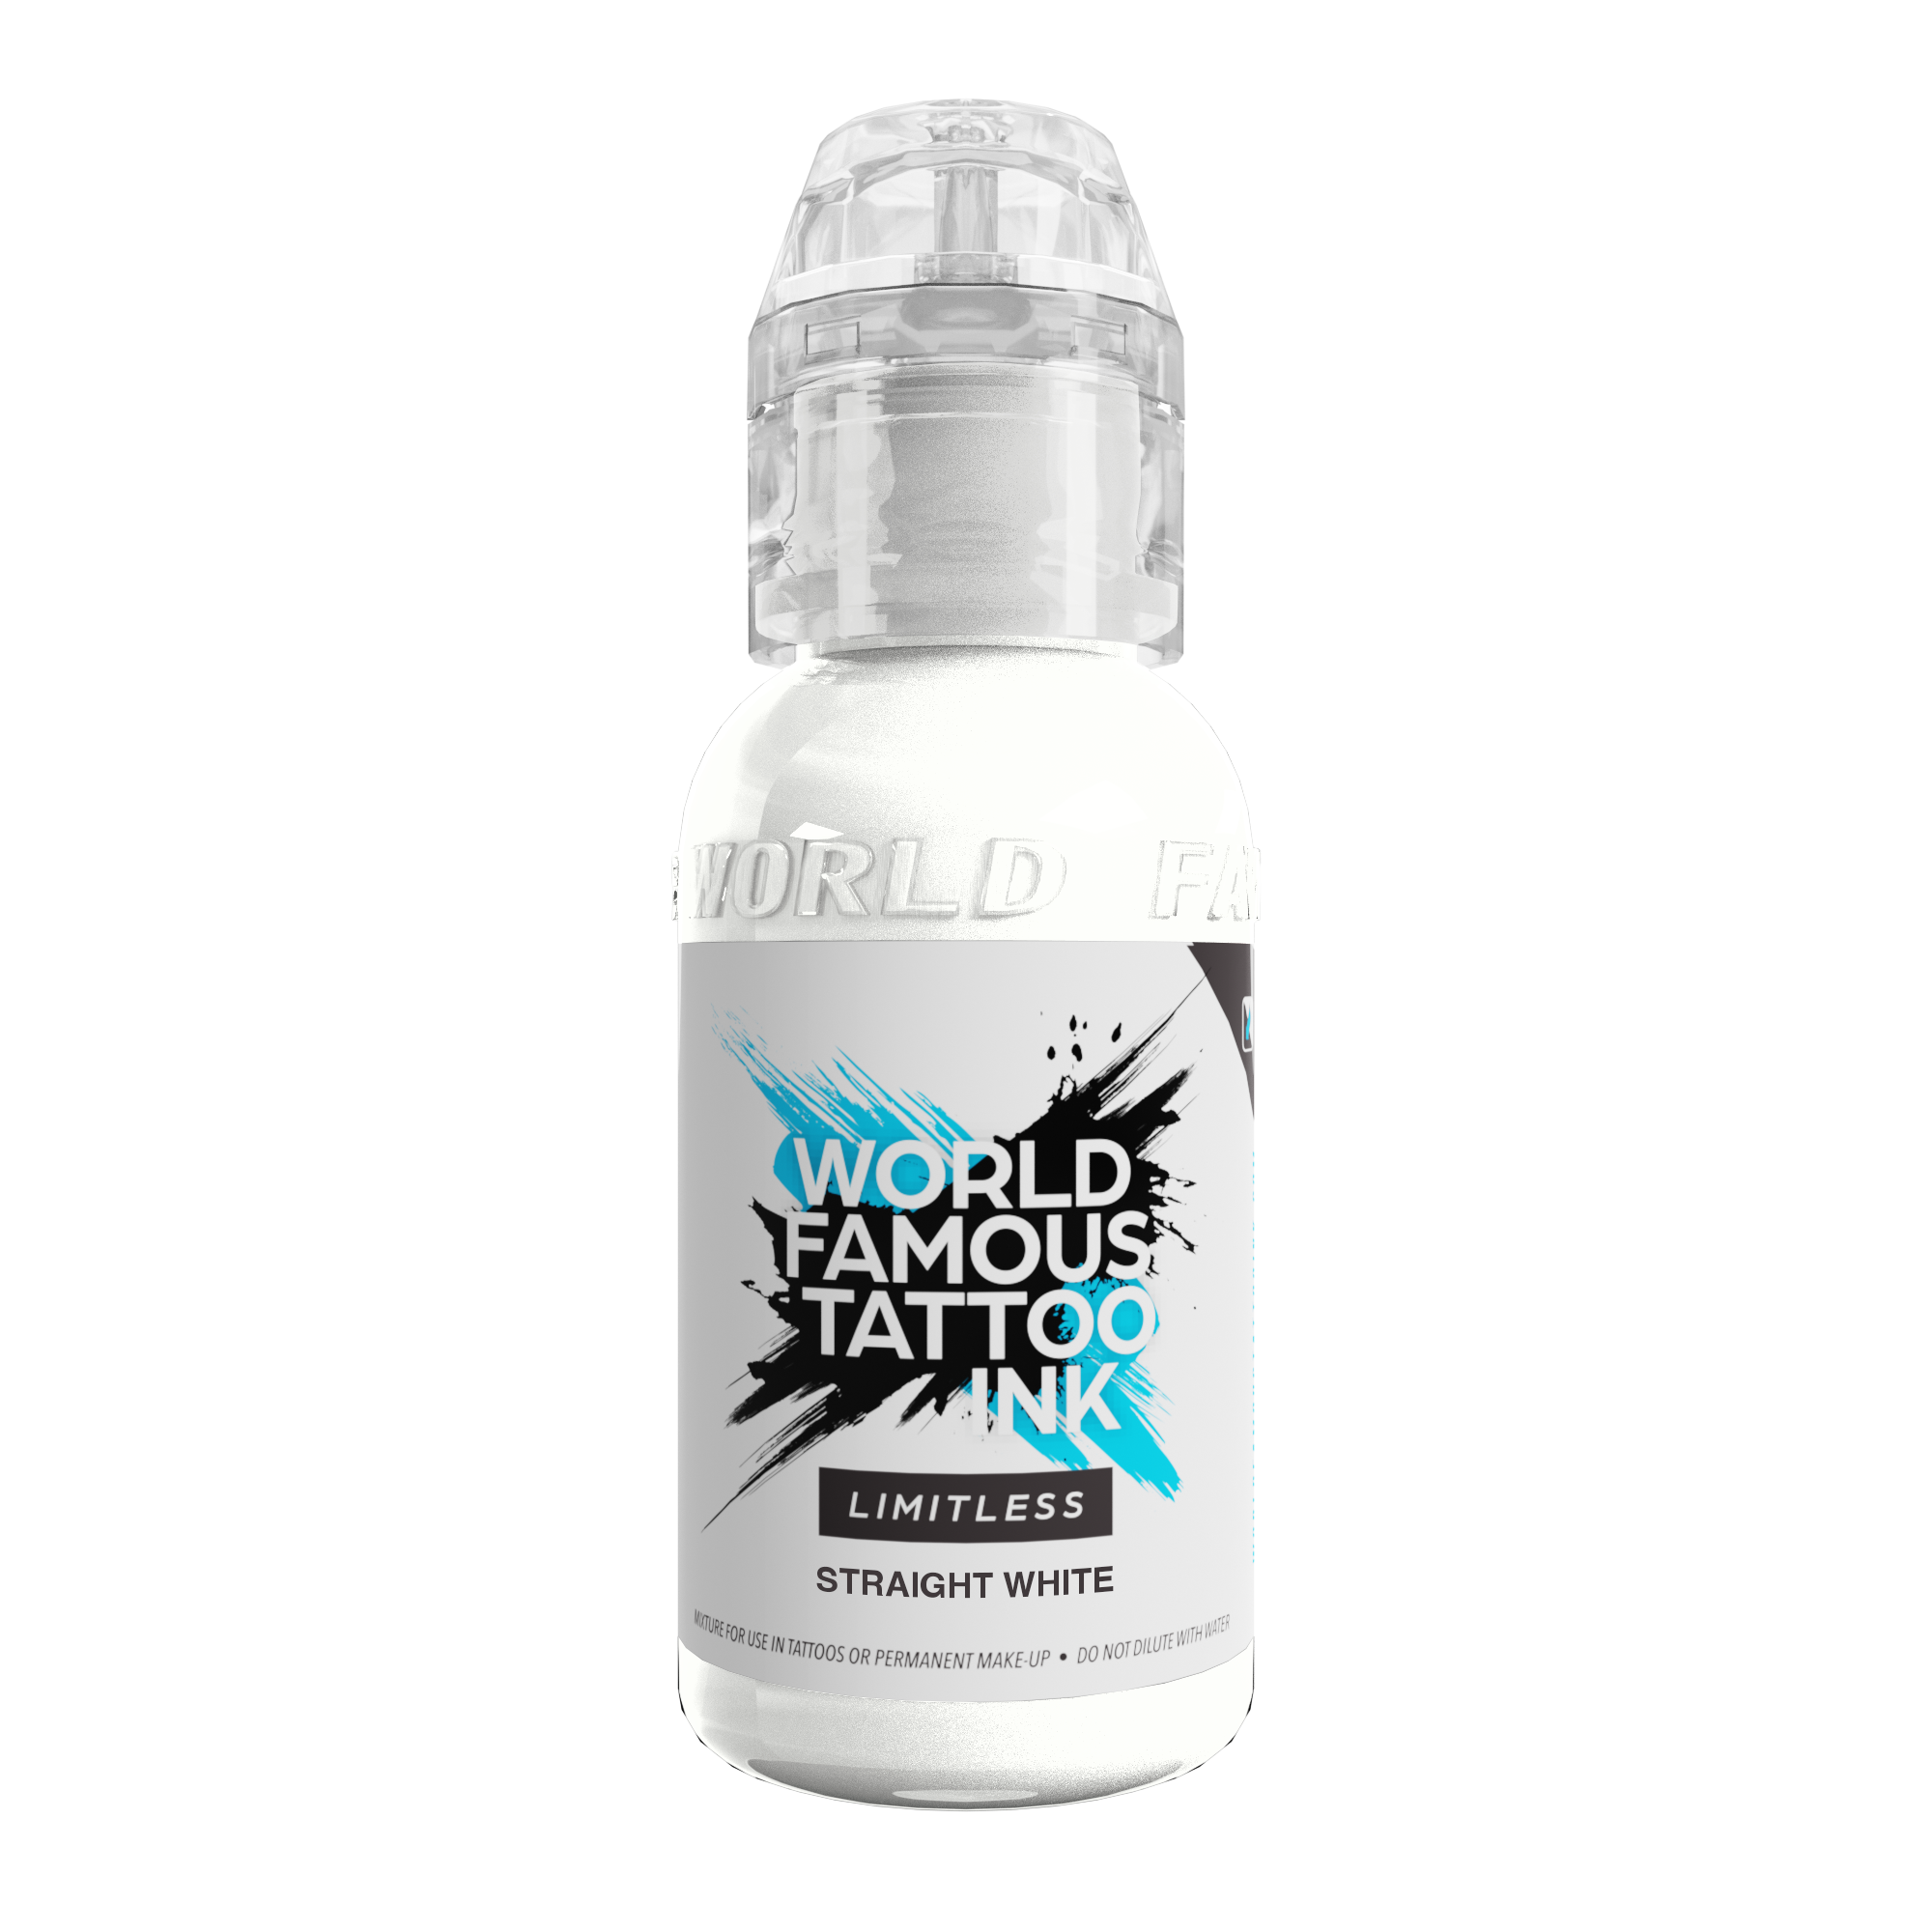 World Famous - Limitless Tattoo Ink - Straight White